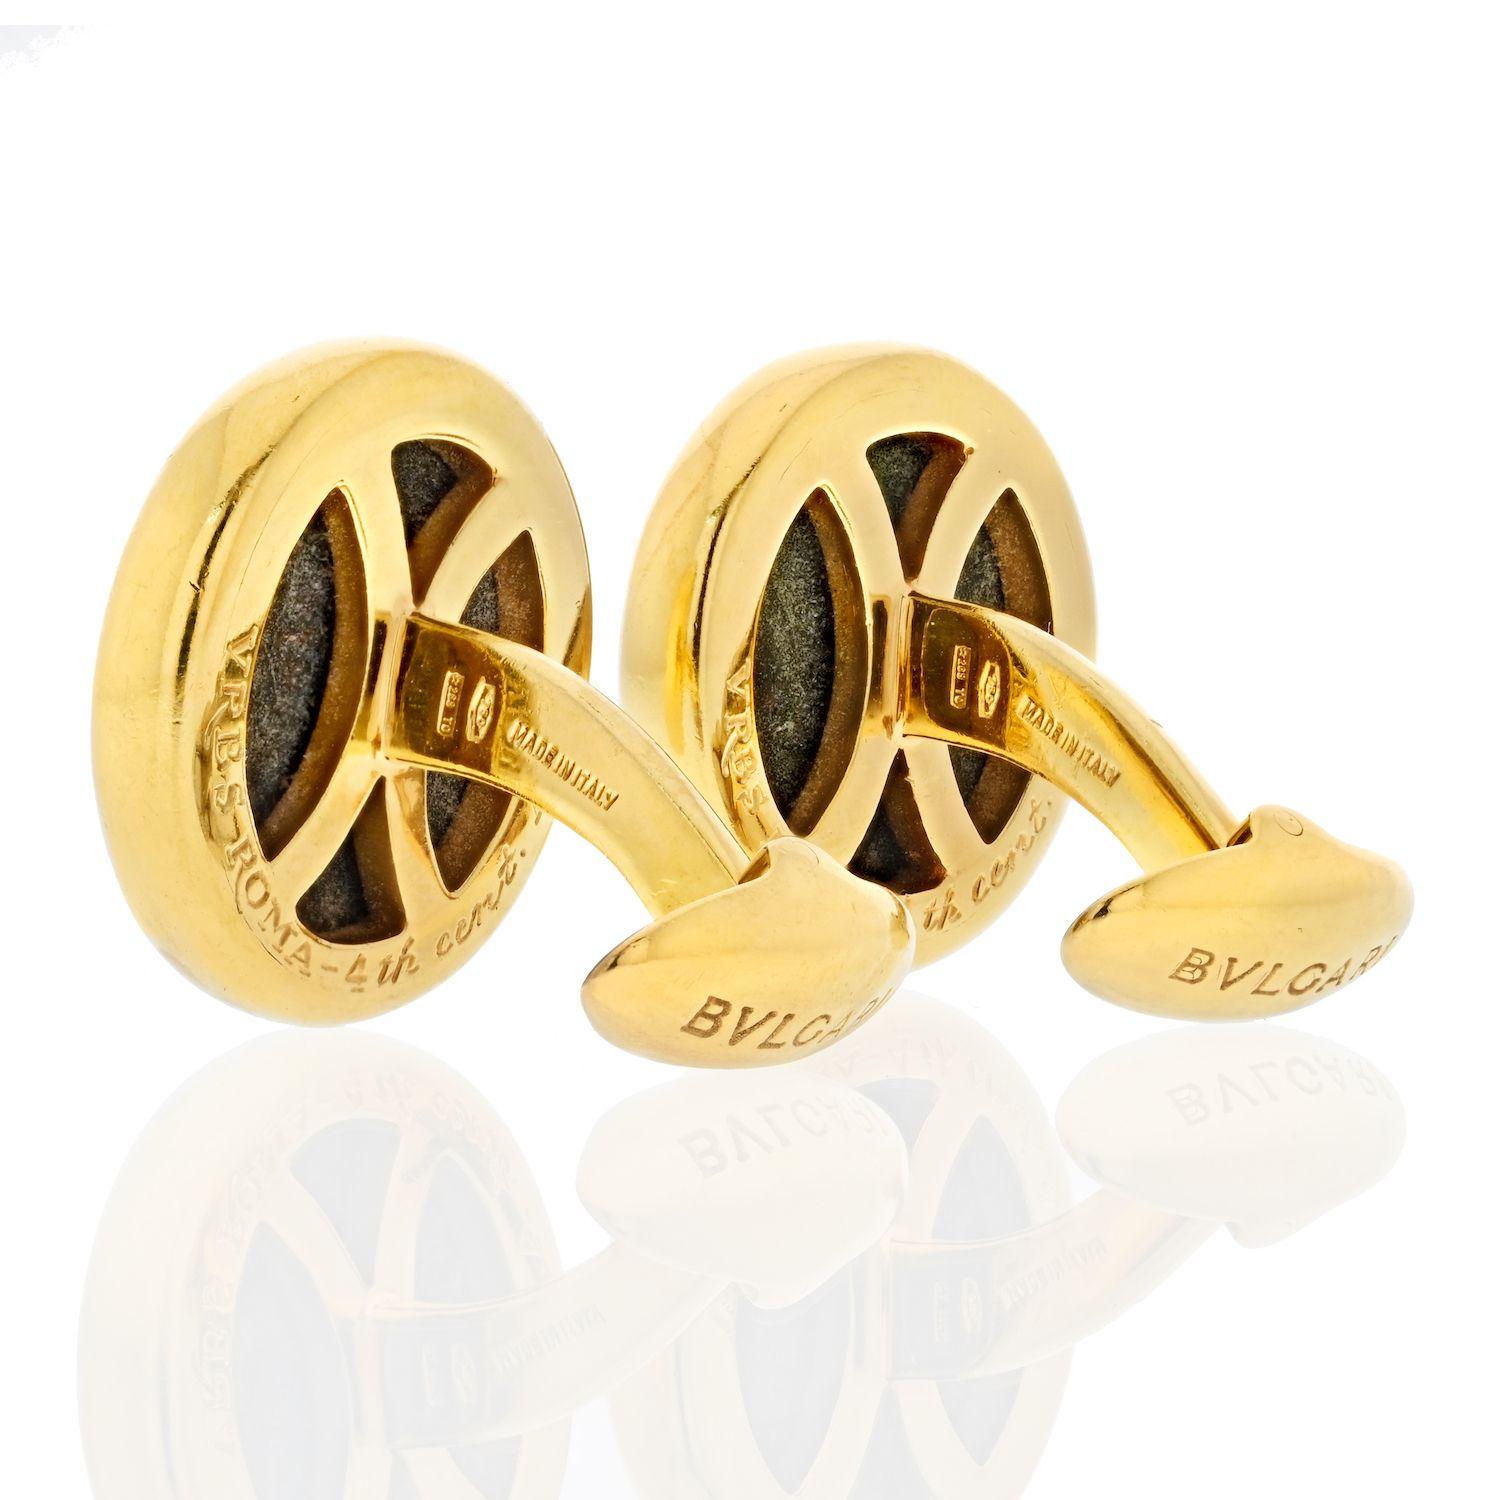 Want to make a thoughtful and special gift? Then look no further. Estate Bvlgari coin cufflinks that are just under 20mm are a perfect choice. 

Bvlgari 18k yellow gold ancient coin cufflinks are the perfect gift for any special occasion! The